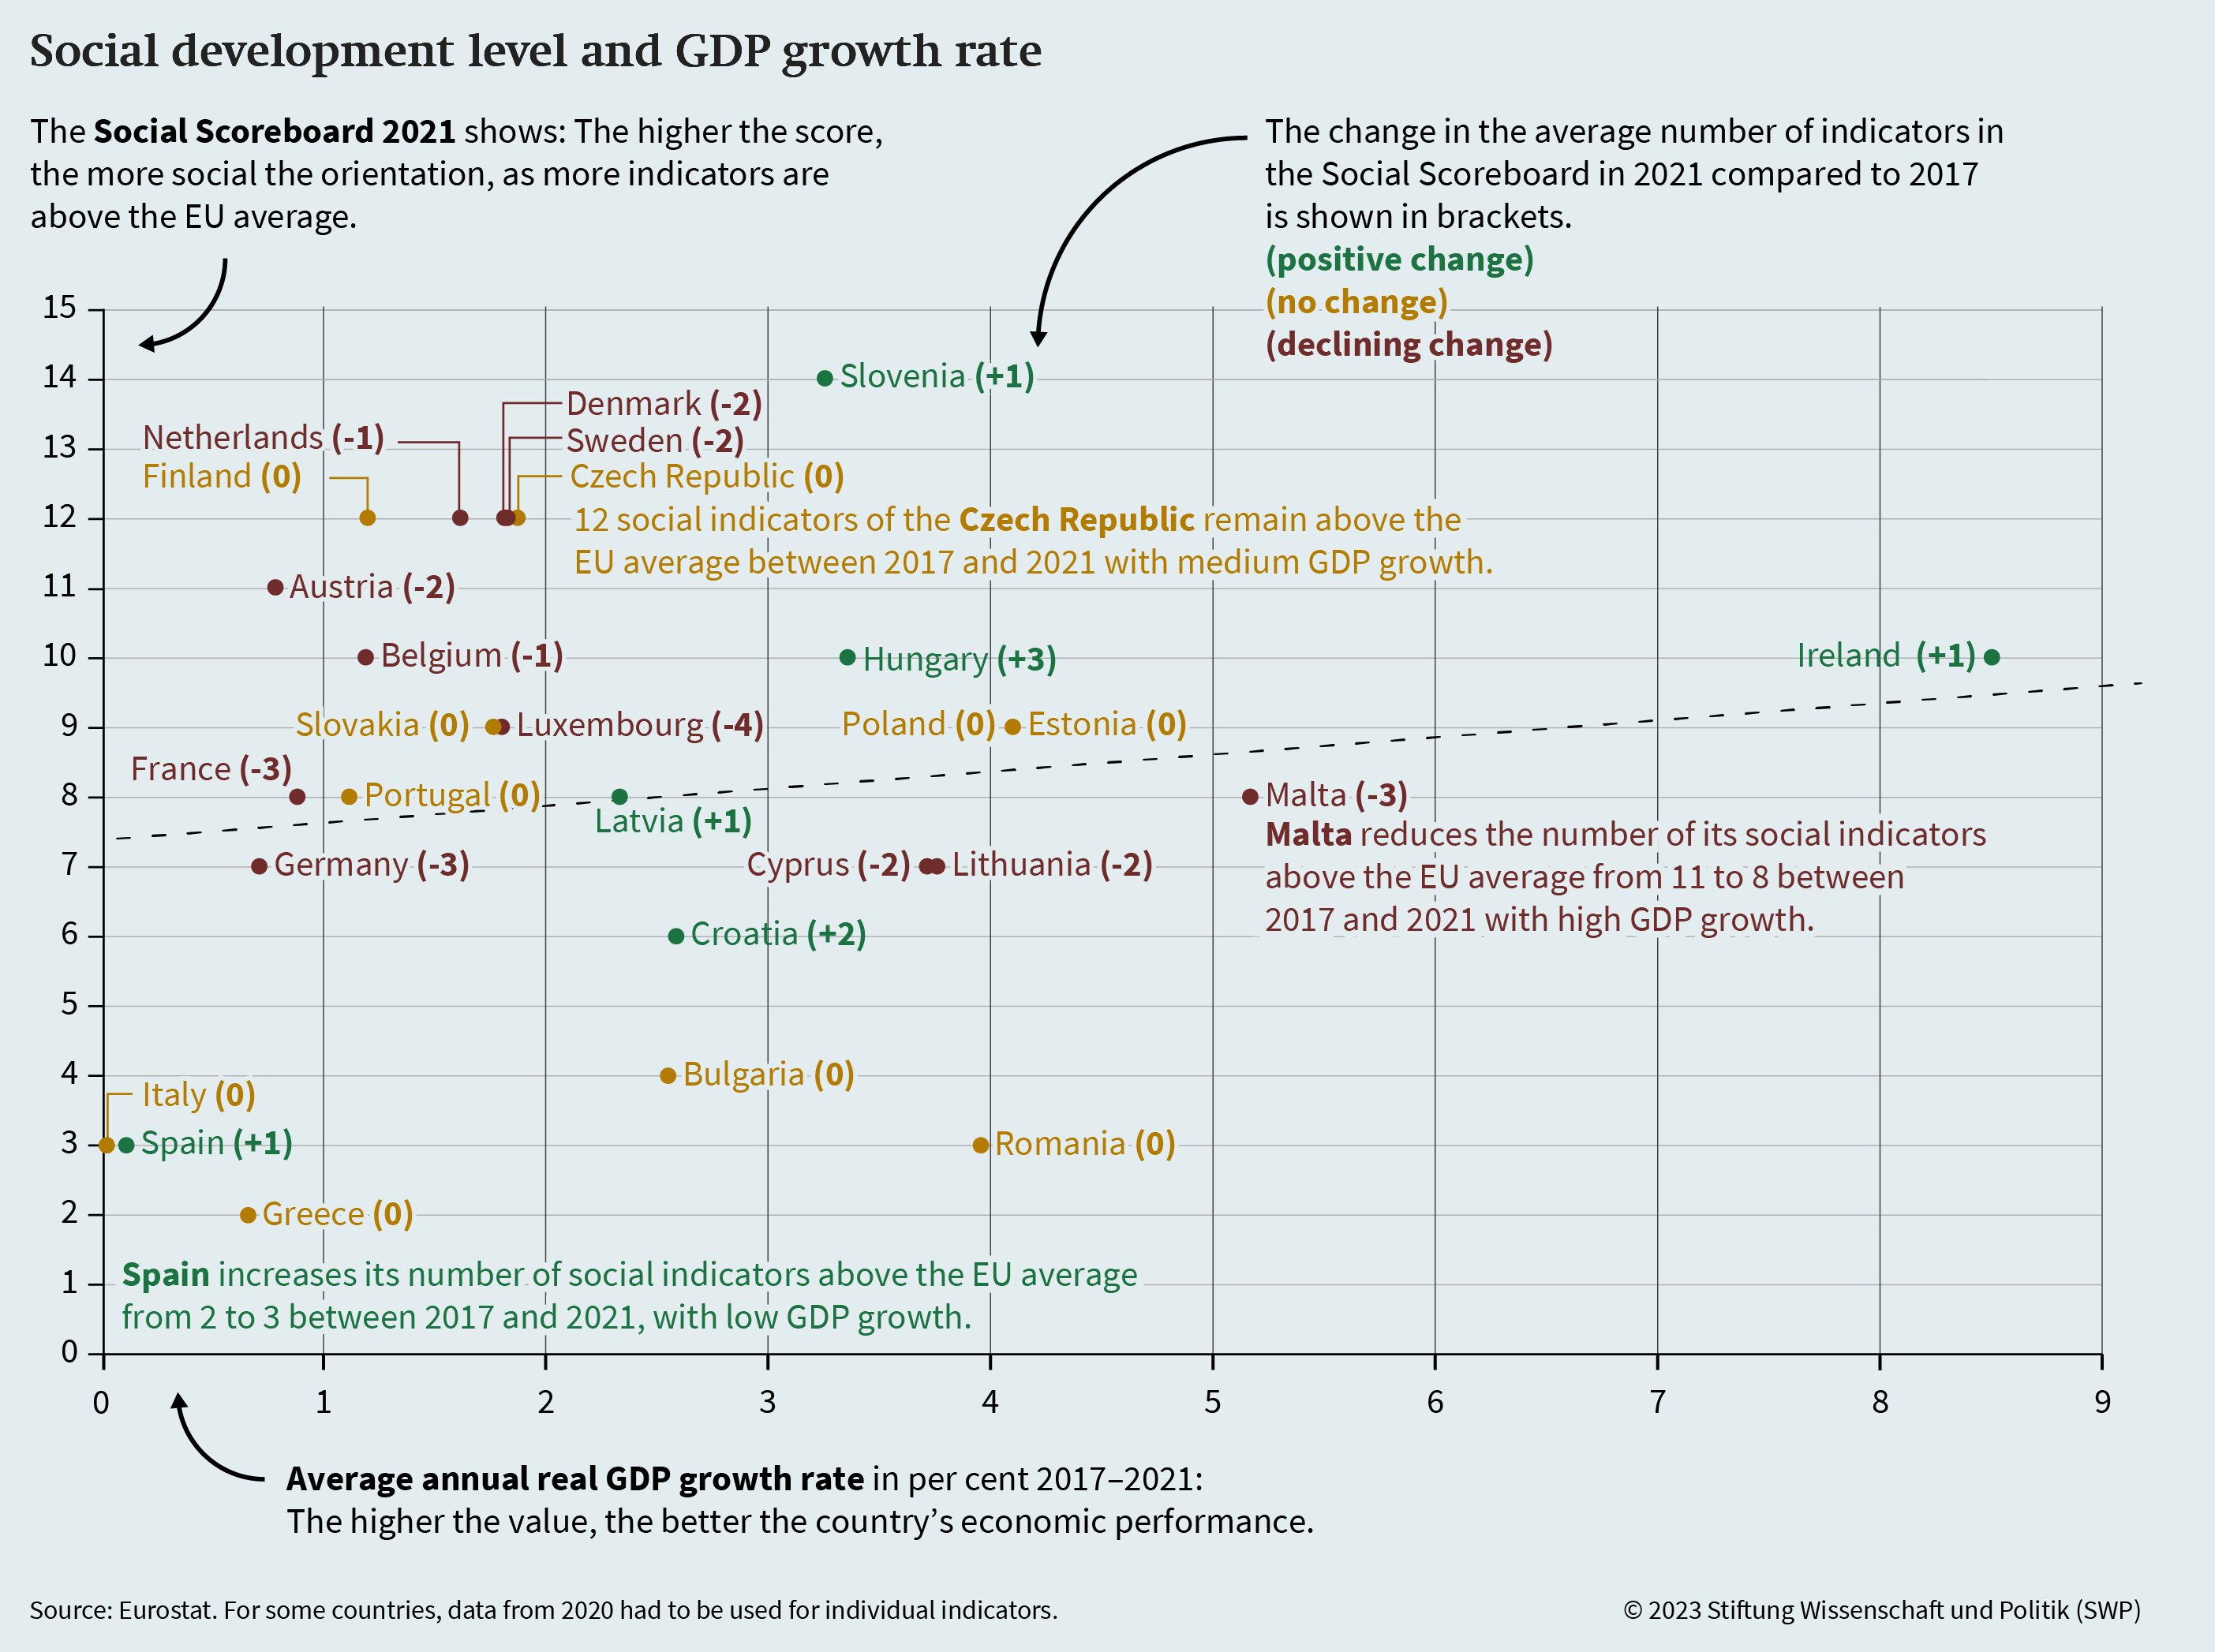 Figure 2: Social development level and GDP growth rate